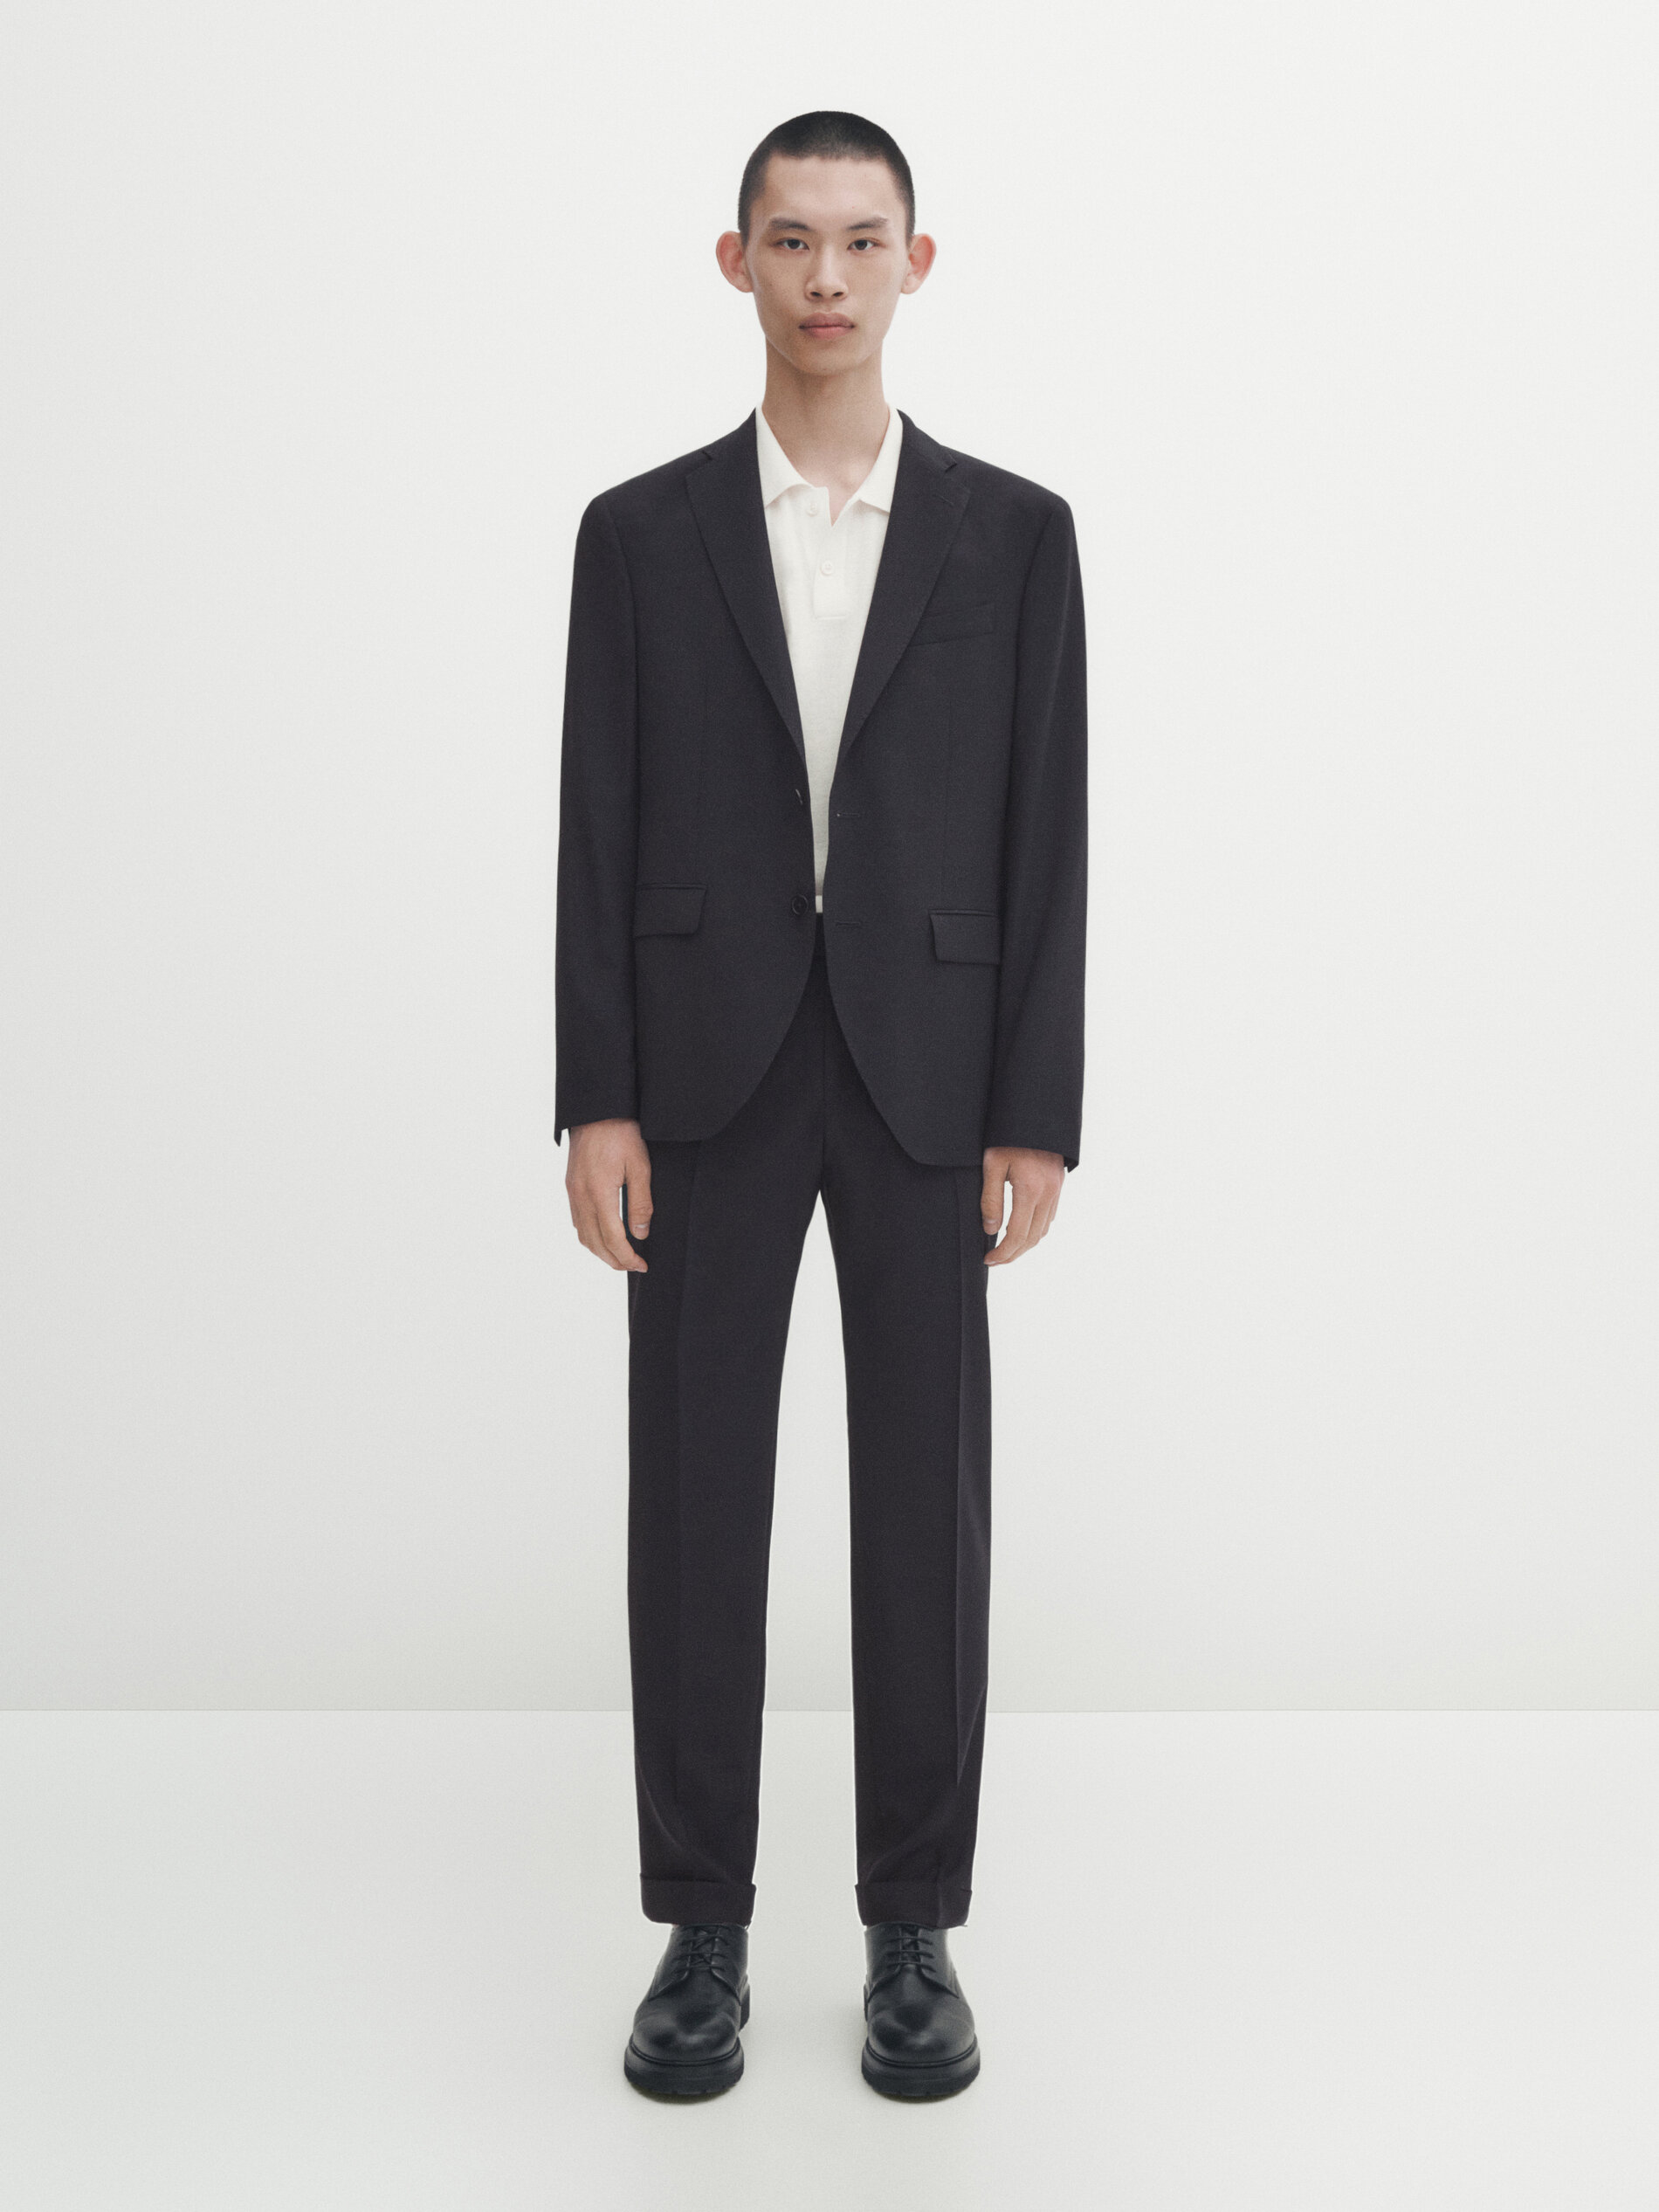 Gregory Hand-Tailored Tuxedo Trouser – The Helm Clothing